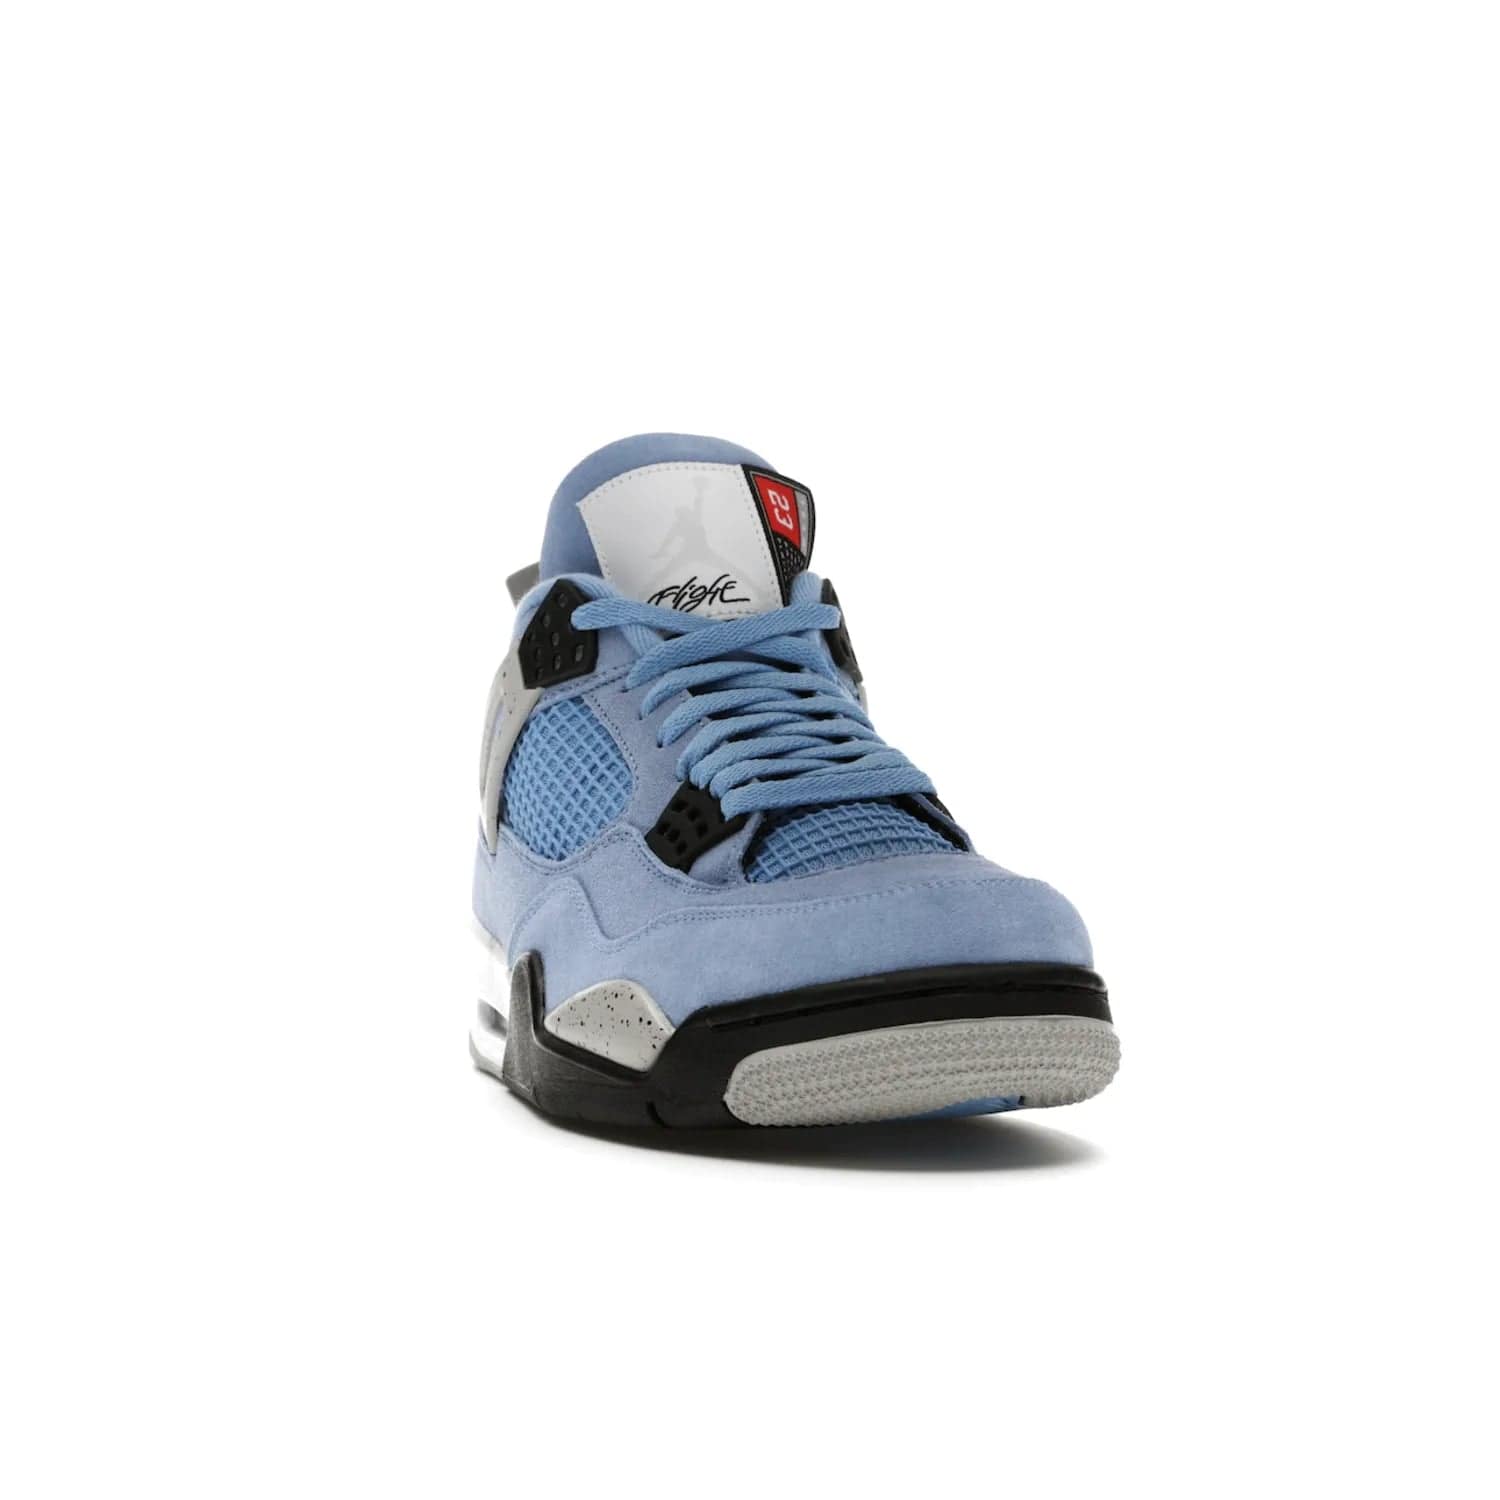 Jordan 4 Retro University Blue - Image 8 - Only at www.BallersClubKickz.com - The Air Jordan 4 University Blue honors MJ's alma mater. Rich University Blue suede, panels of netting, and Cement Grey speckled eyelets give this design an edgy look. Features a black, white and Tech Grey sole with a clear Air unit and two woven labels on the tongue. Jumpman logo & Team Jordan jock tag included. Released April 2021.